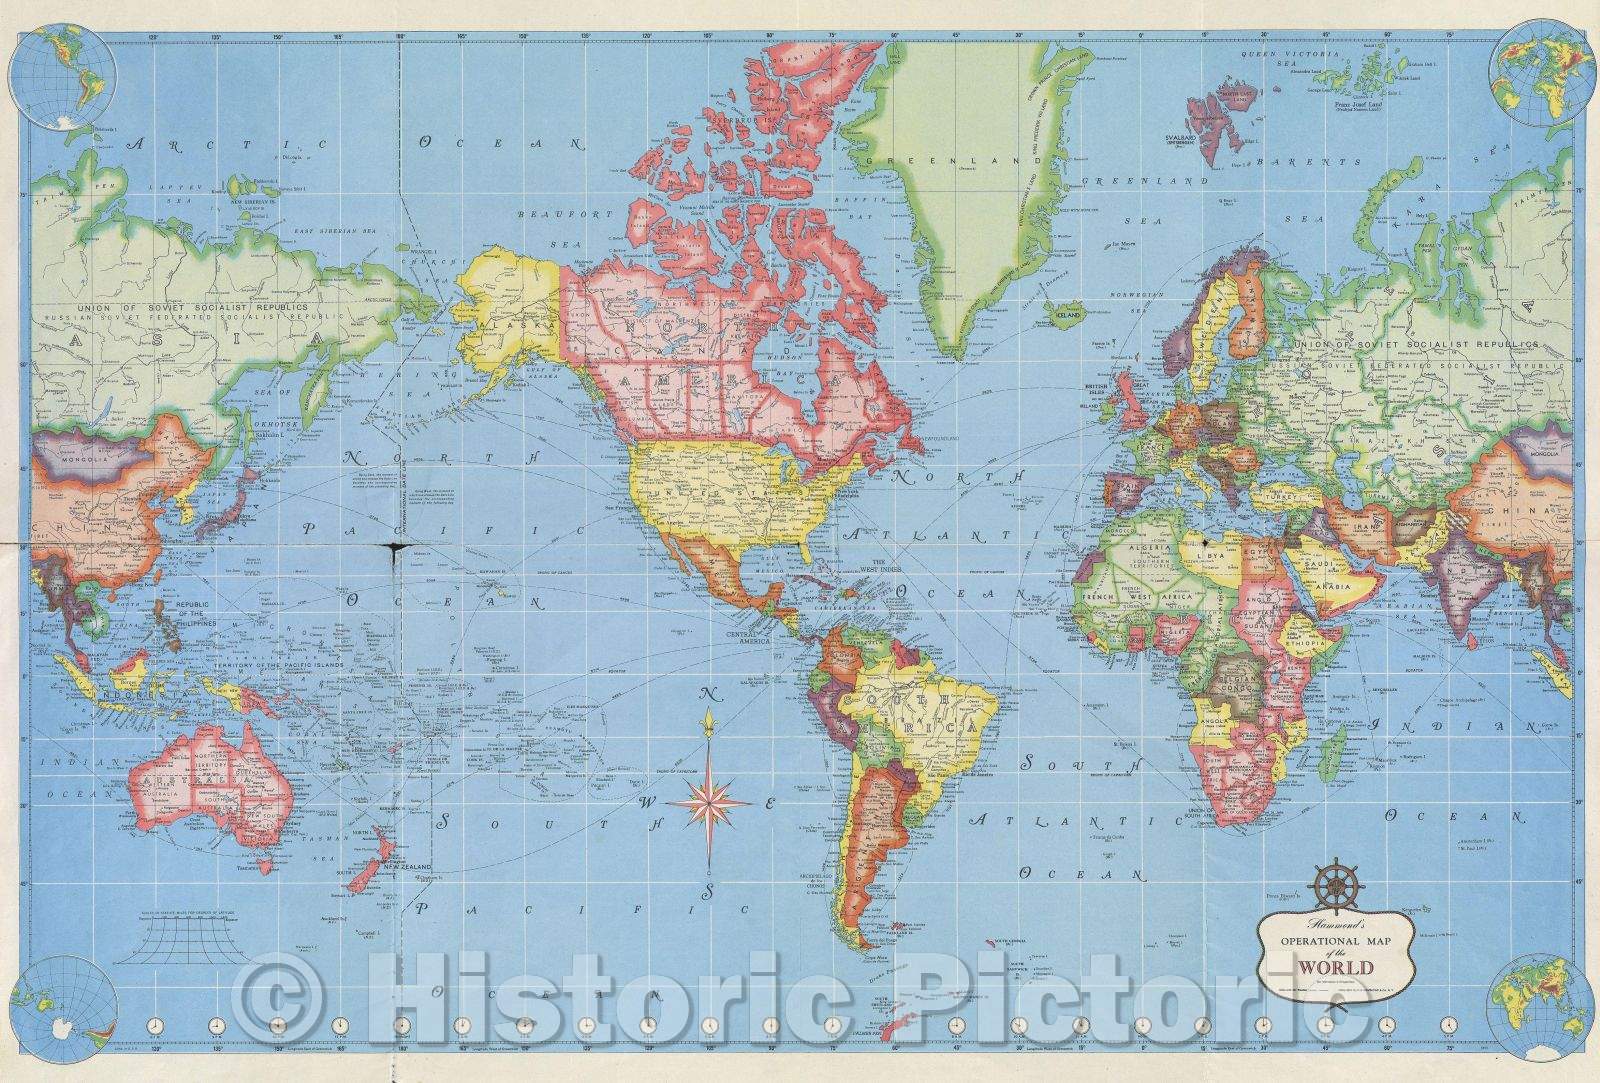 Historic Map : Military Maps of All Theaters of Operation. Military Maps of Asia-Europe, Strategic map of Korea, Operational Map of the World Featuring Bomber Ranges, 1950 , Vintage Wall Art